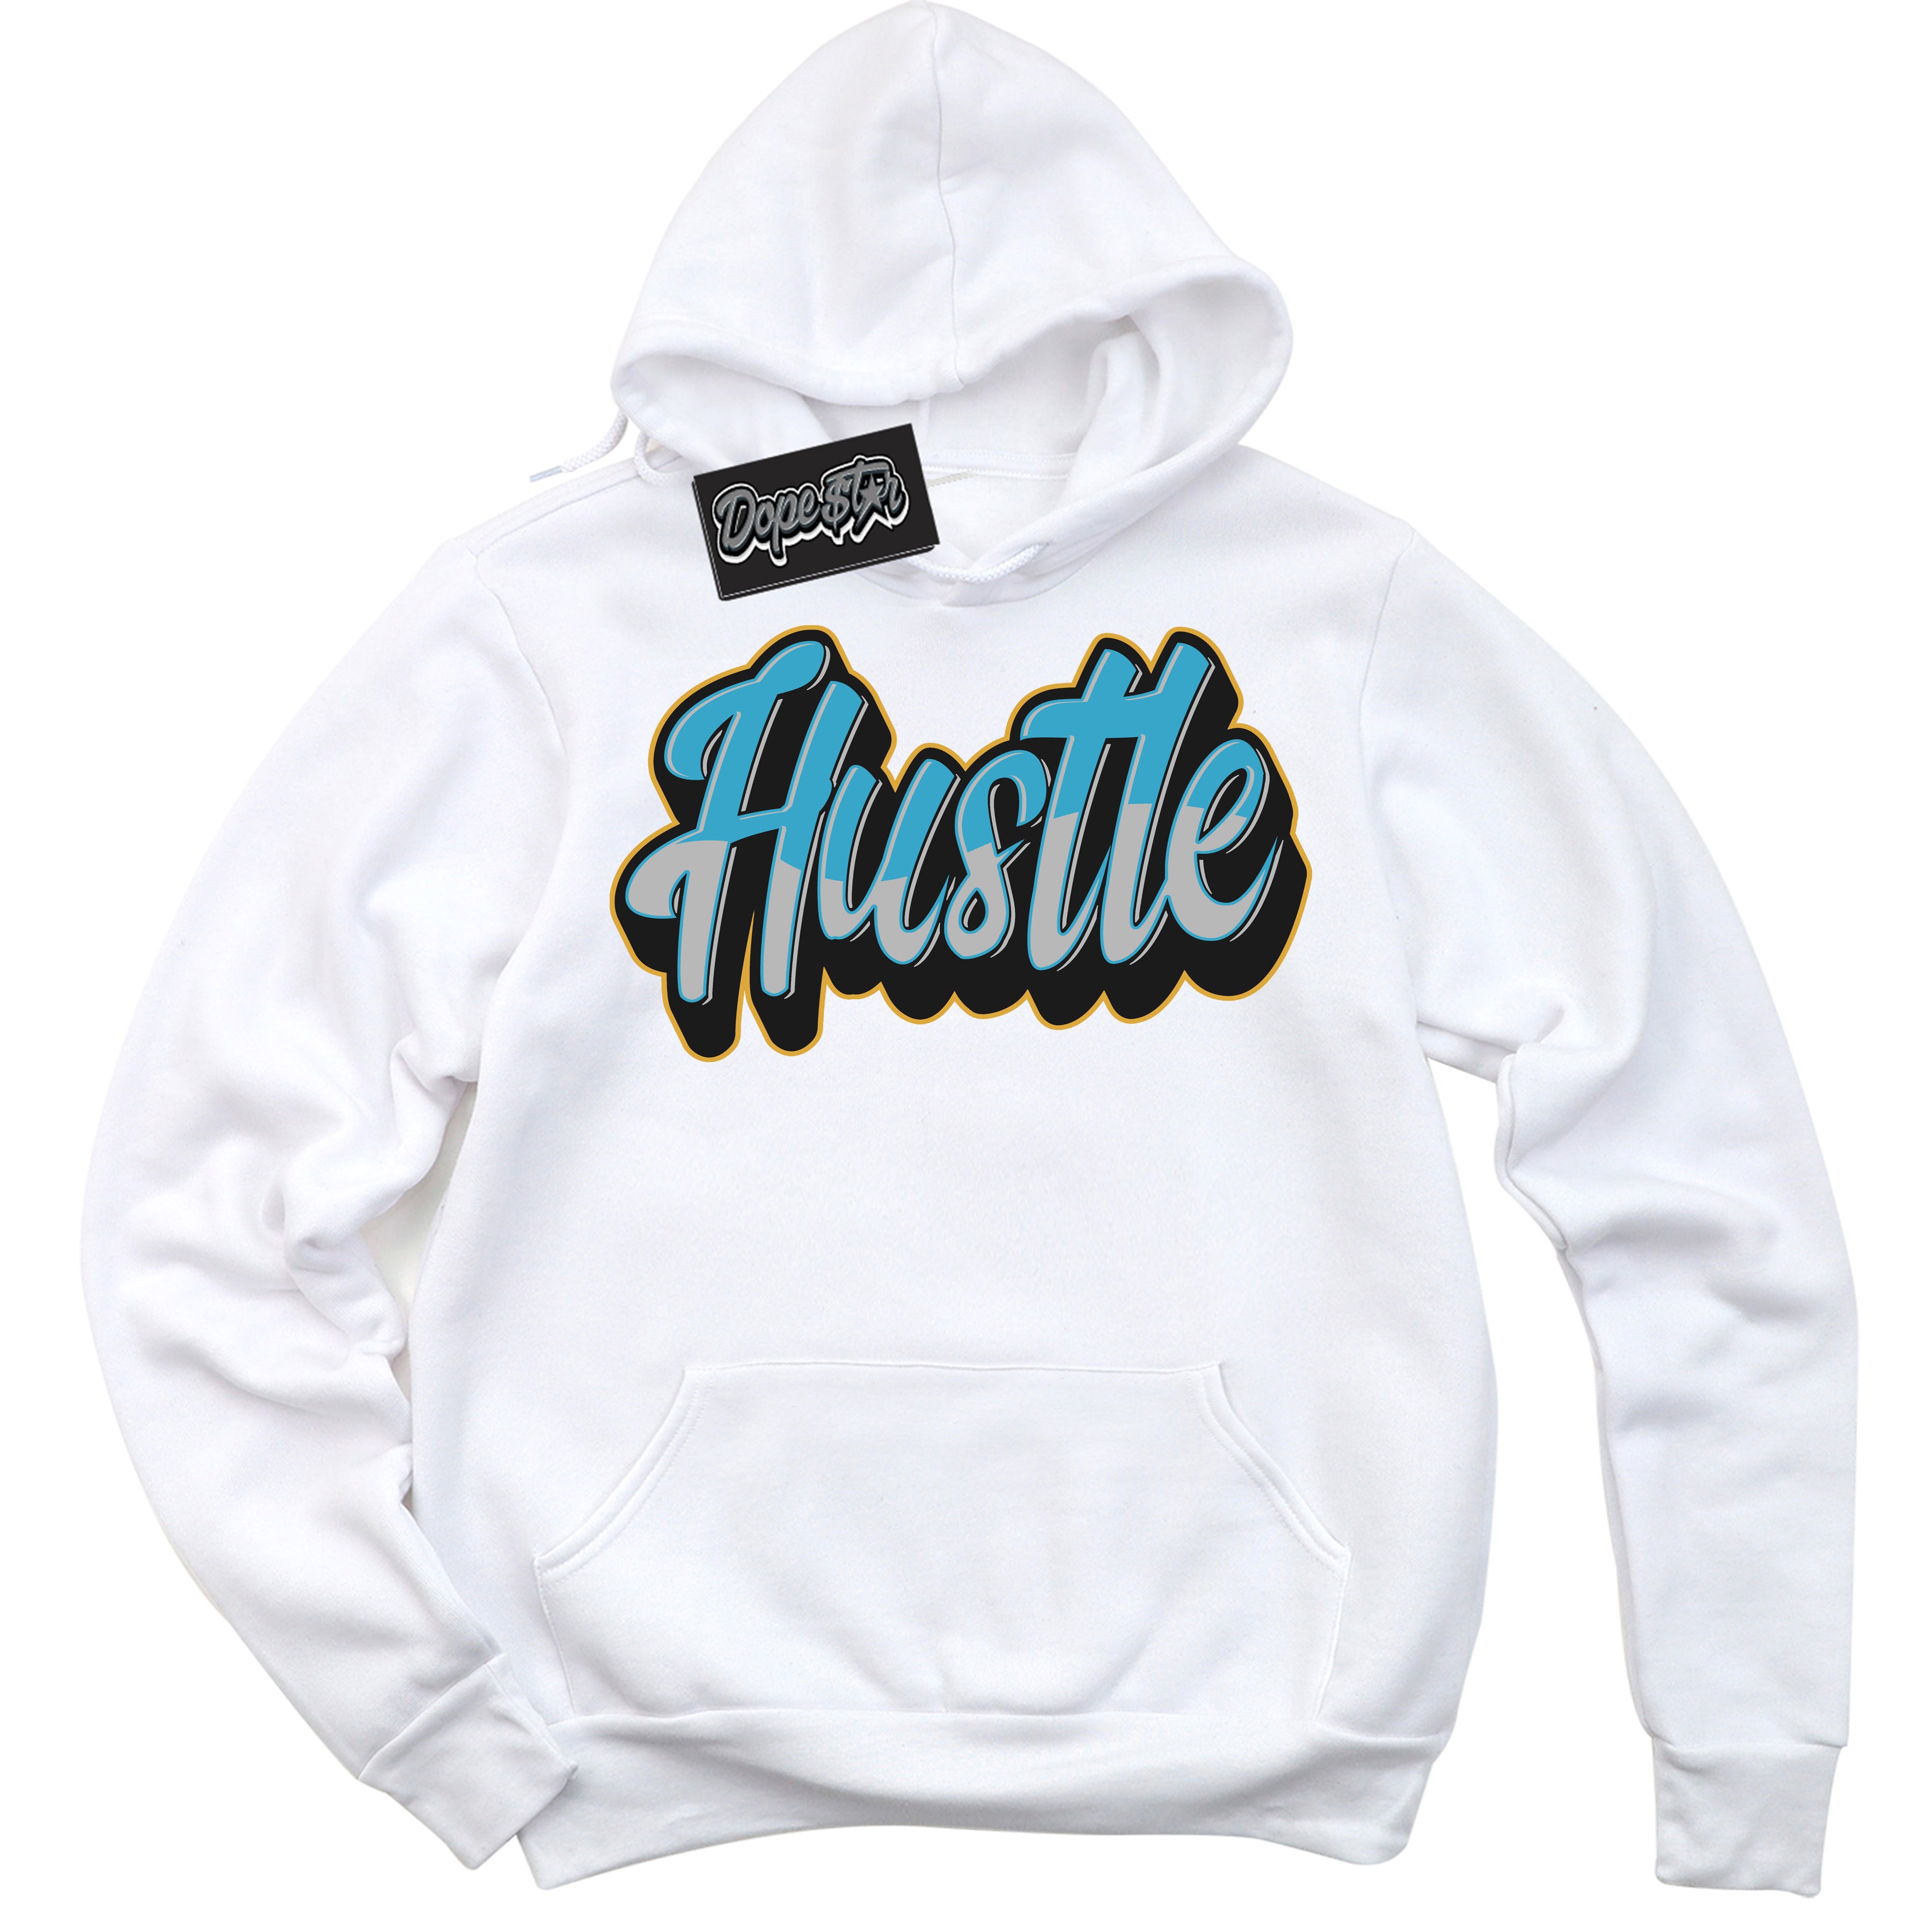 Cool White Hoodie with “ Hustle ”  design that Perfectly Matches Aqua 5s Sneakers.